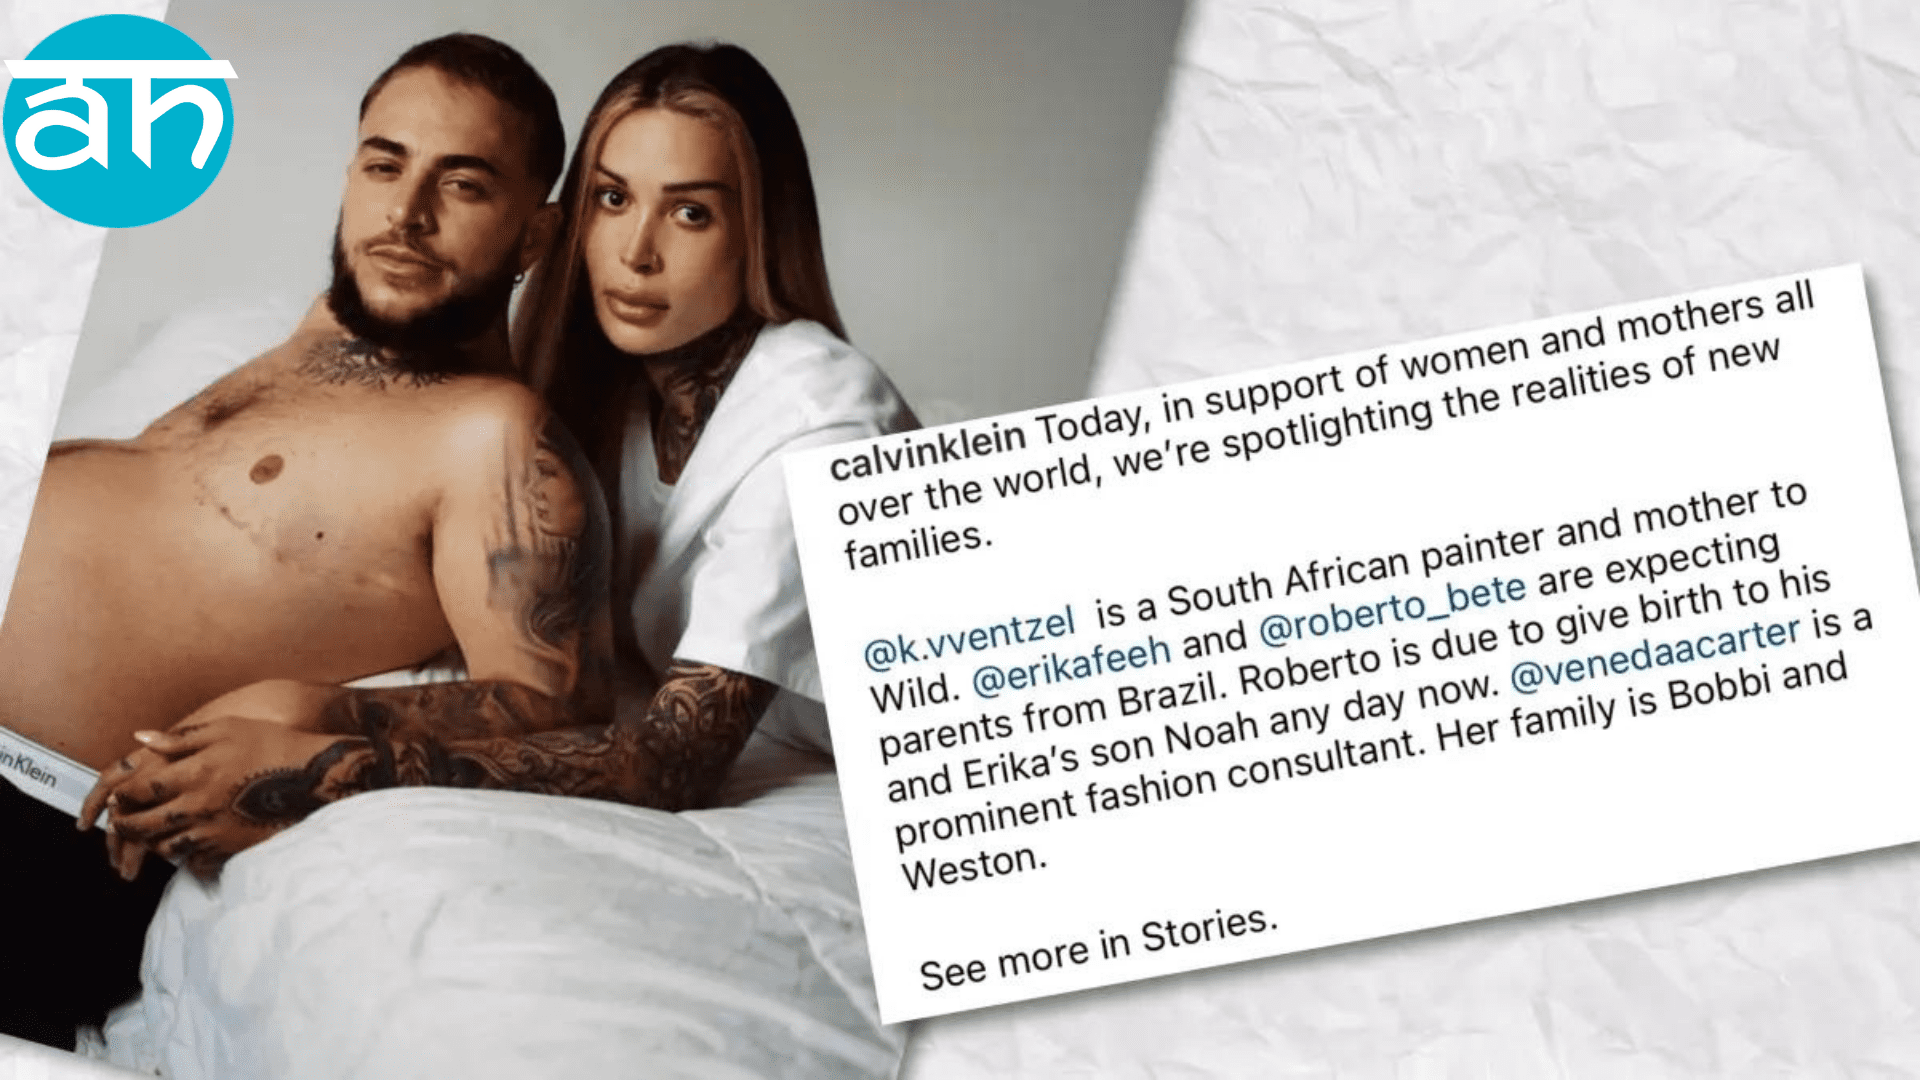 pregnant-man-in-calvin-klein-ad-sparks-international-controversy